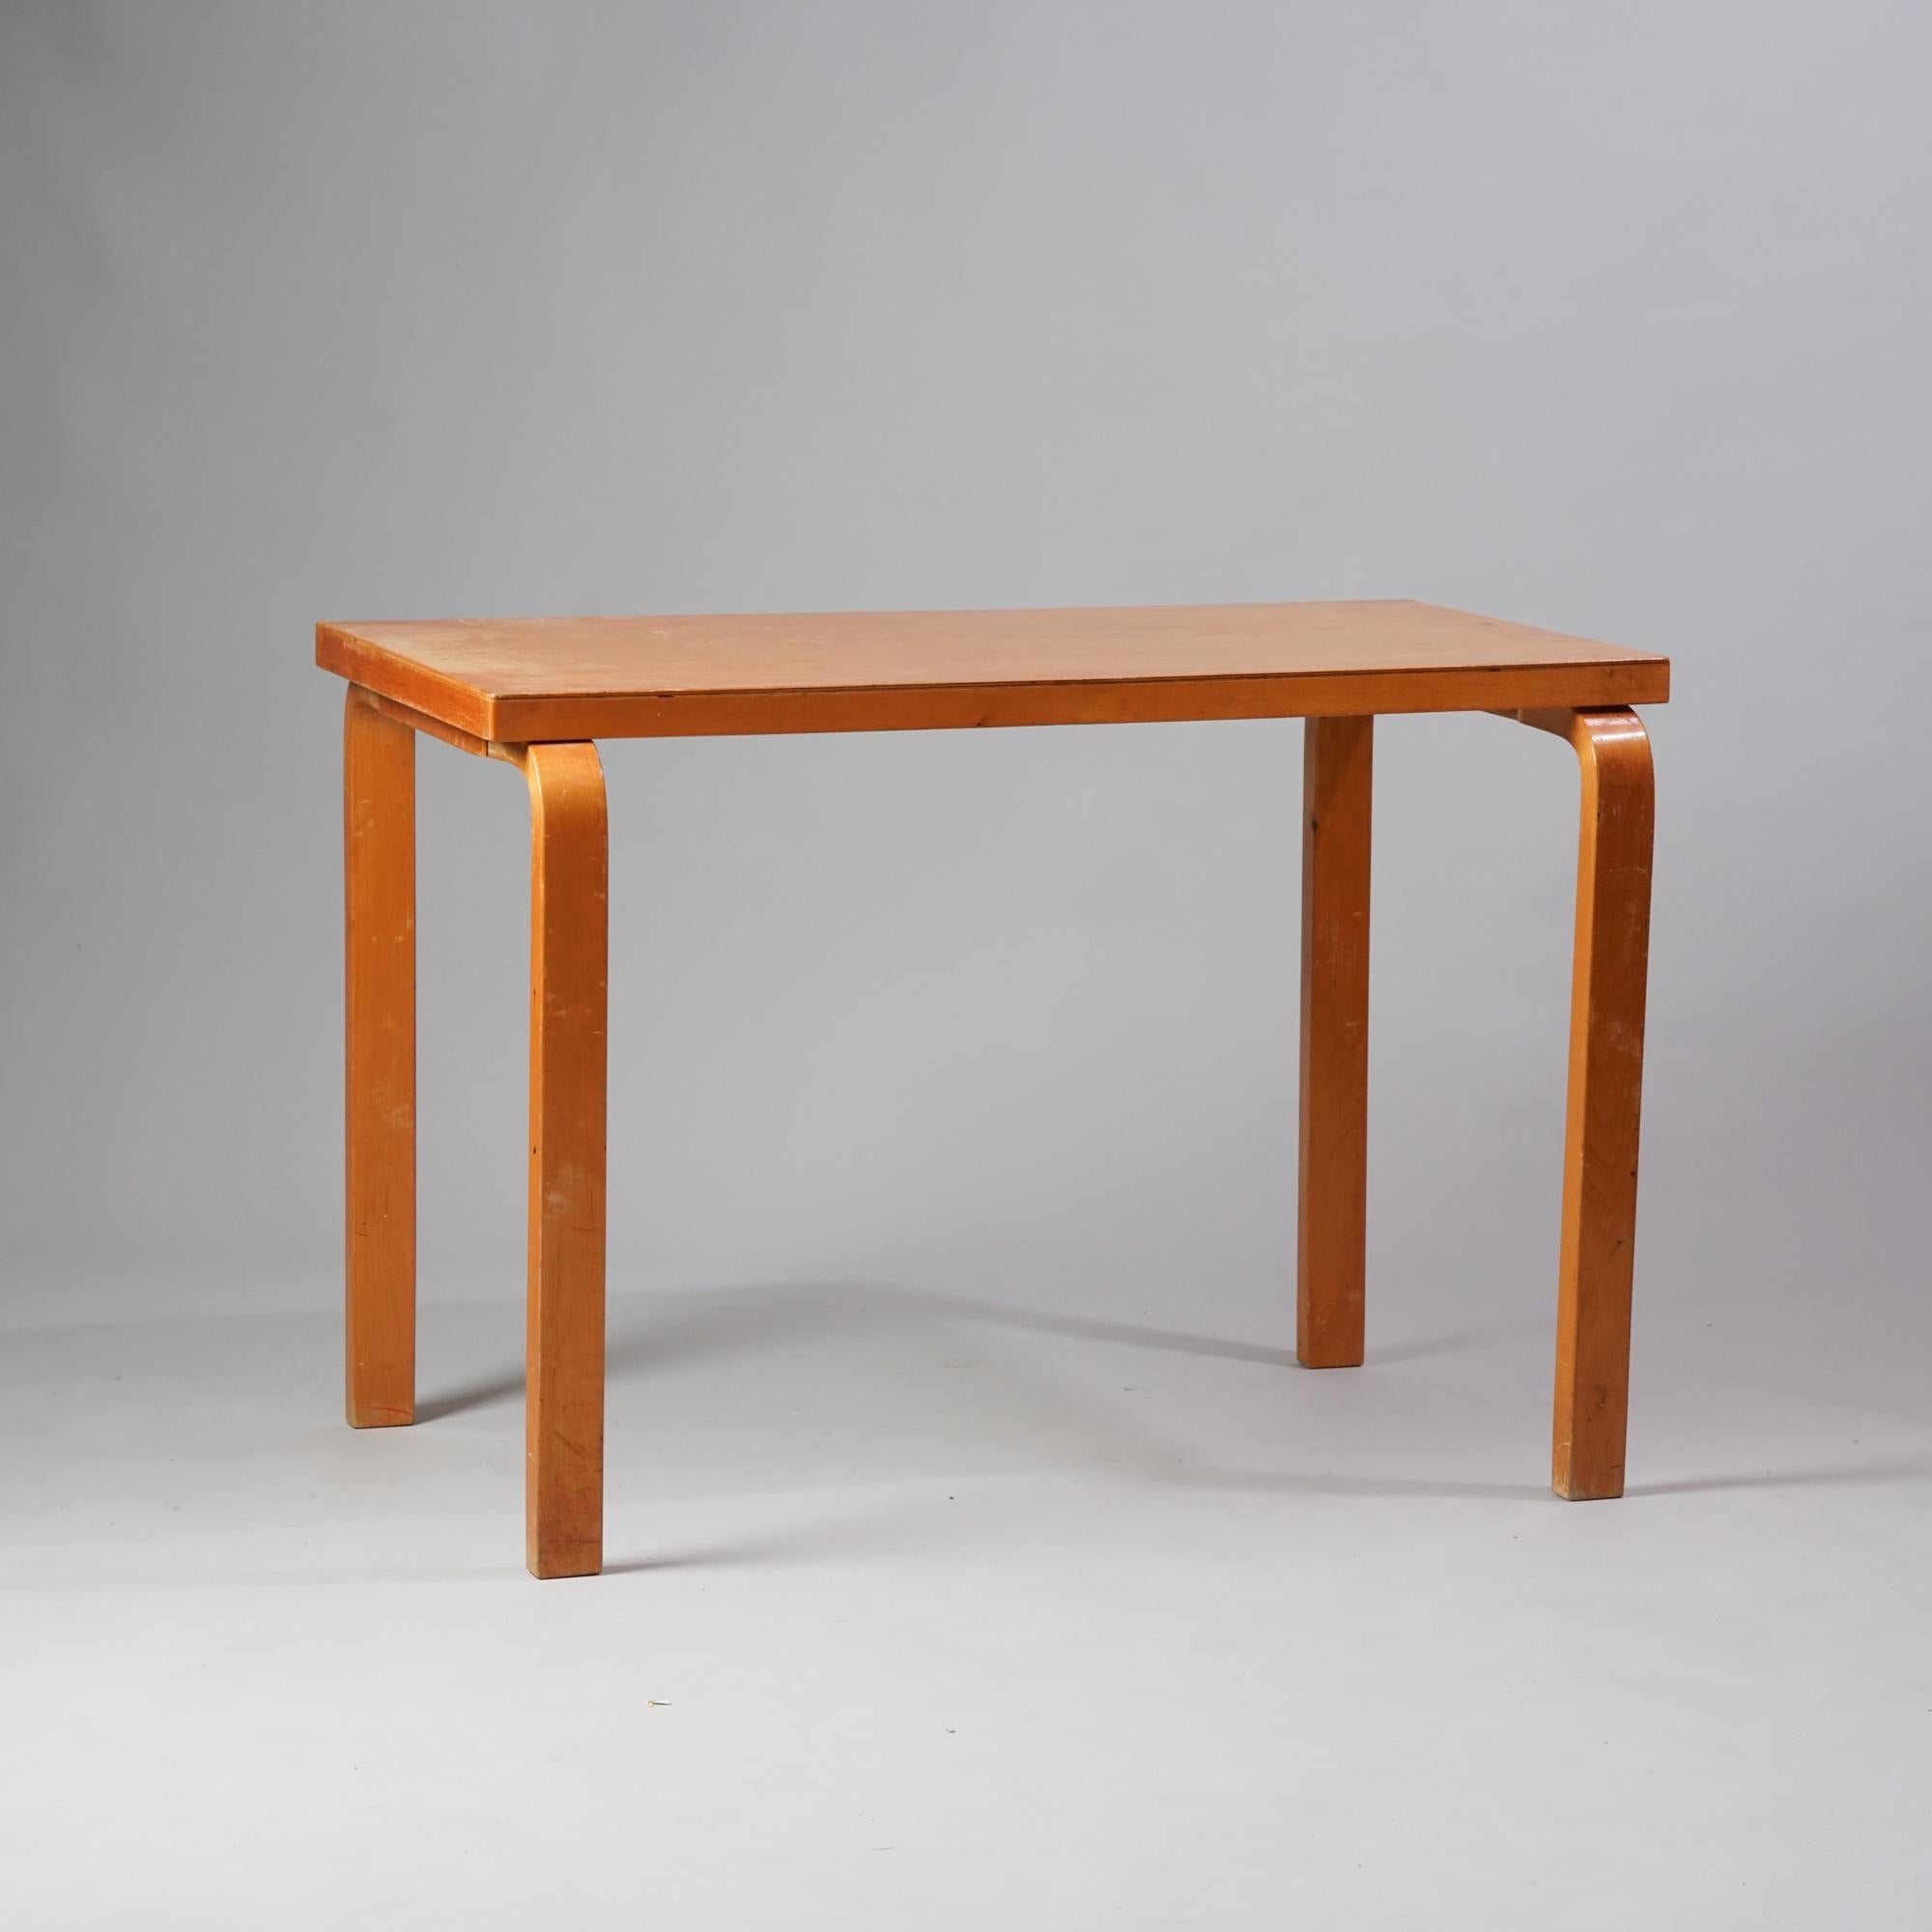 Alvar Aalto table, manufactured by Oy Huonekalu- ja Rakennustyötehdas Ab, 1930/1940s. Birch. Good vintage condition, patina and wear consistent with age and use. 
